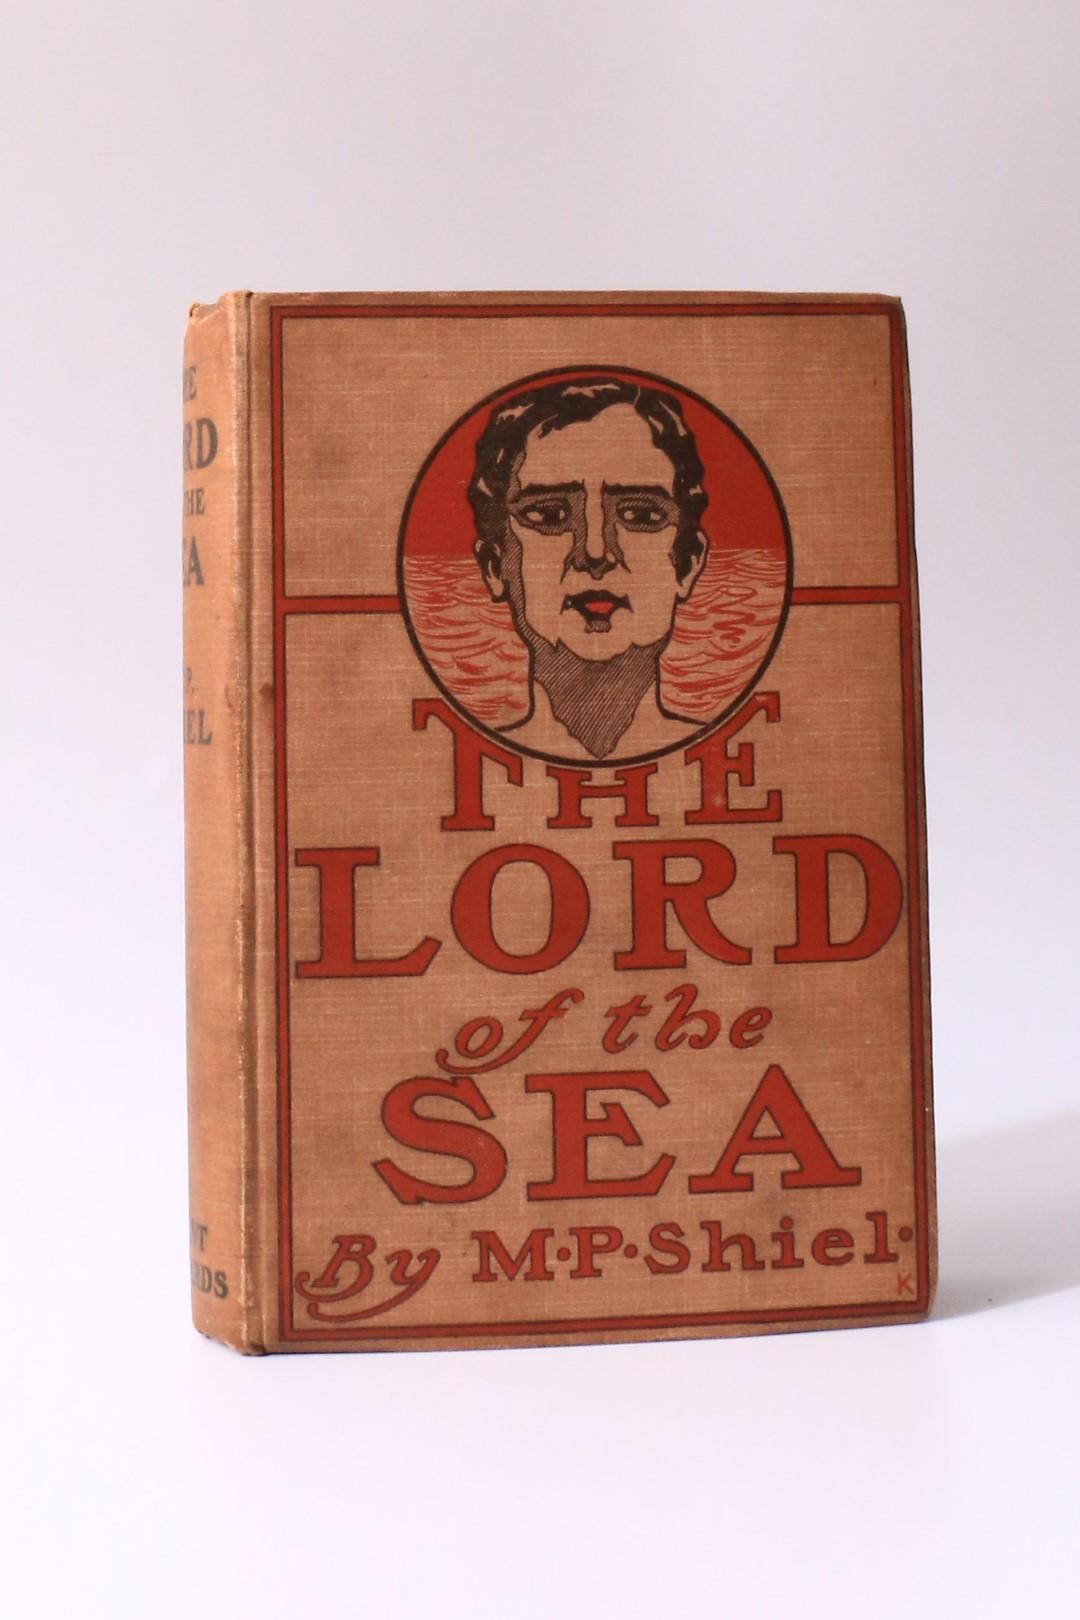 M.P. Shiel - The Lord of the Sea - Grant Richards, 1901, First Edition.